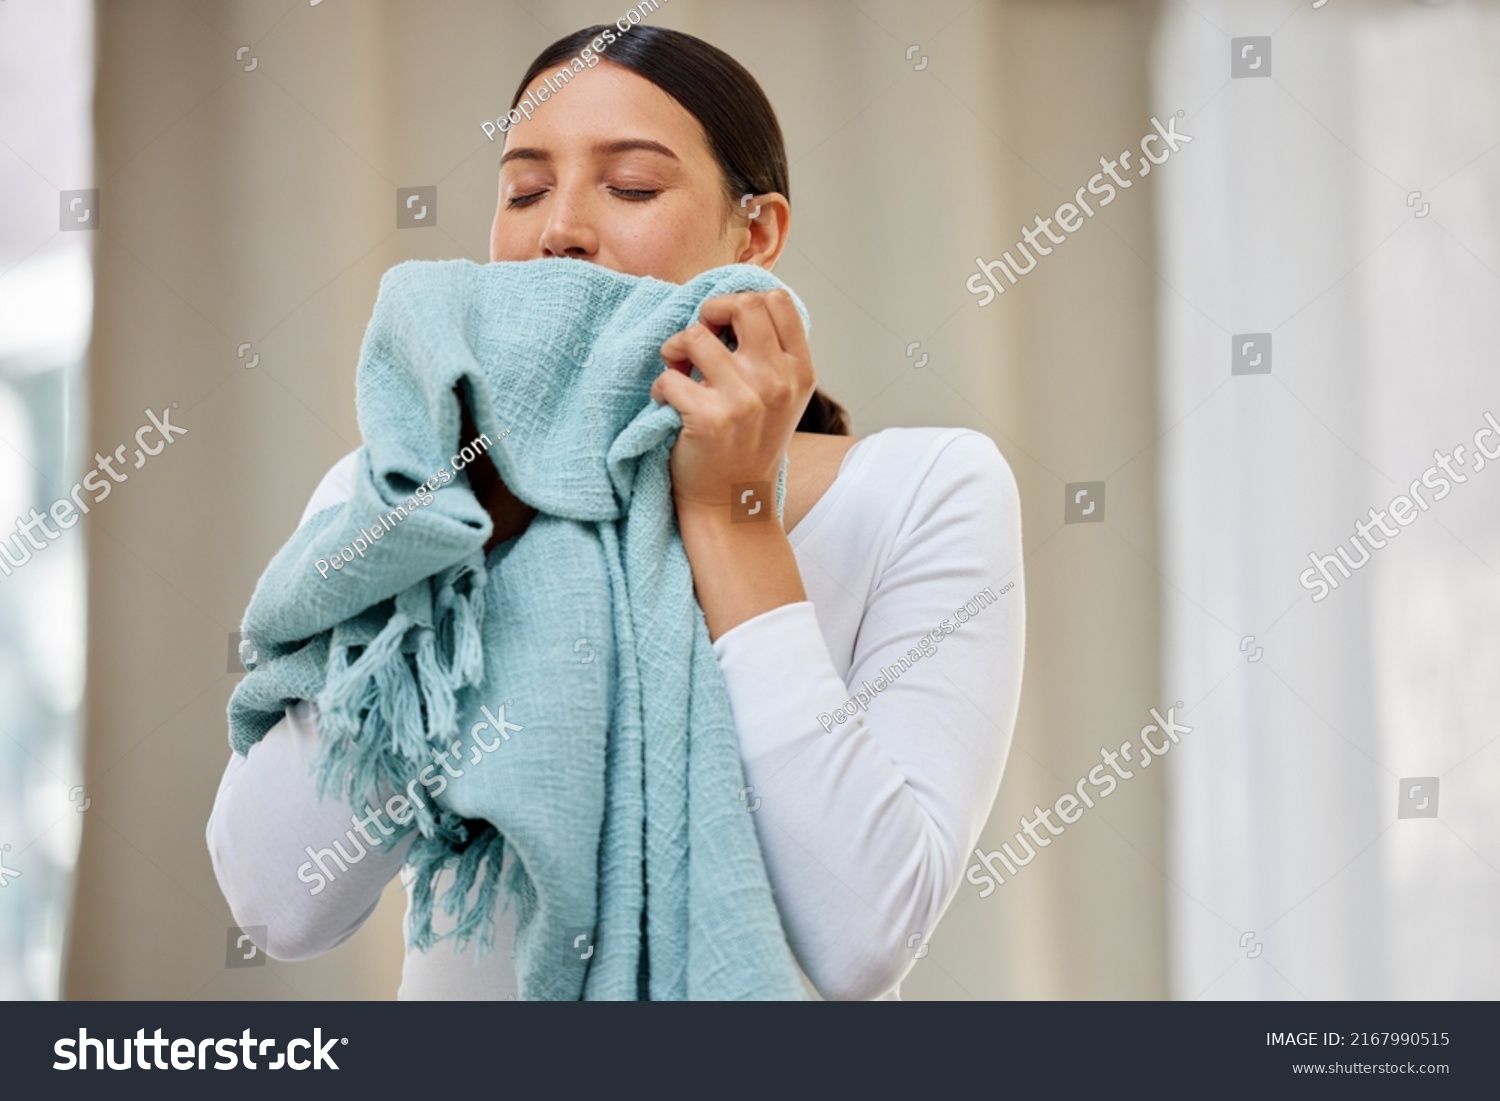 This smell should be bottled. Shot of a young woman smelling freshly cleaned laundry. #2167990515